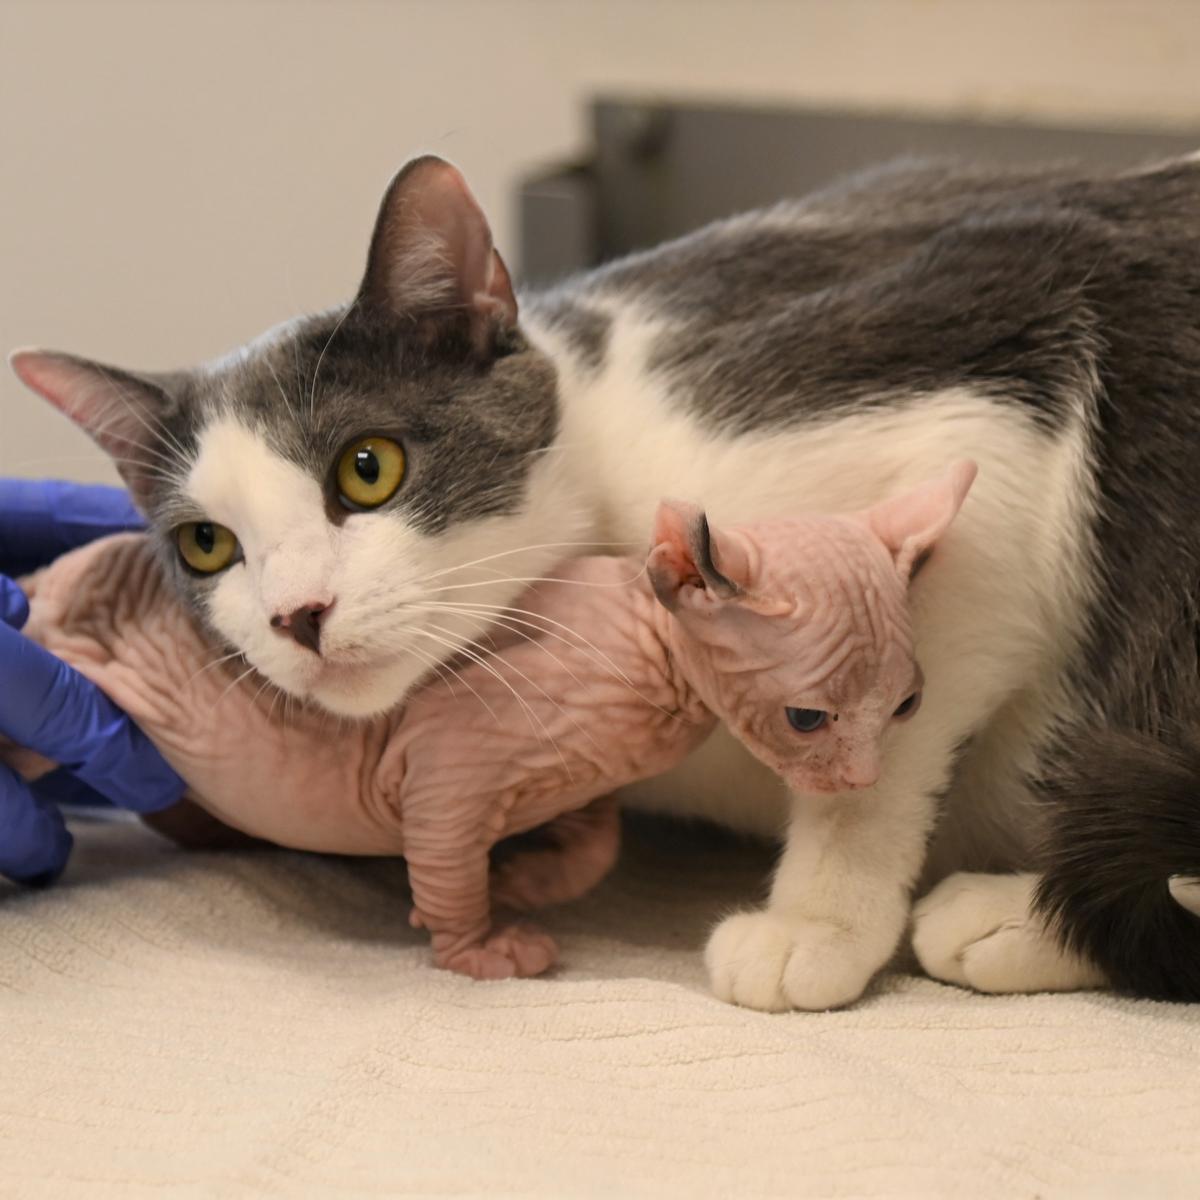 Cleopatra and Bellarina. (Courtesy of <a href="https://animalcenter.org/">Helen Woodward Animal Center</a>)